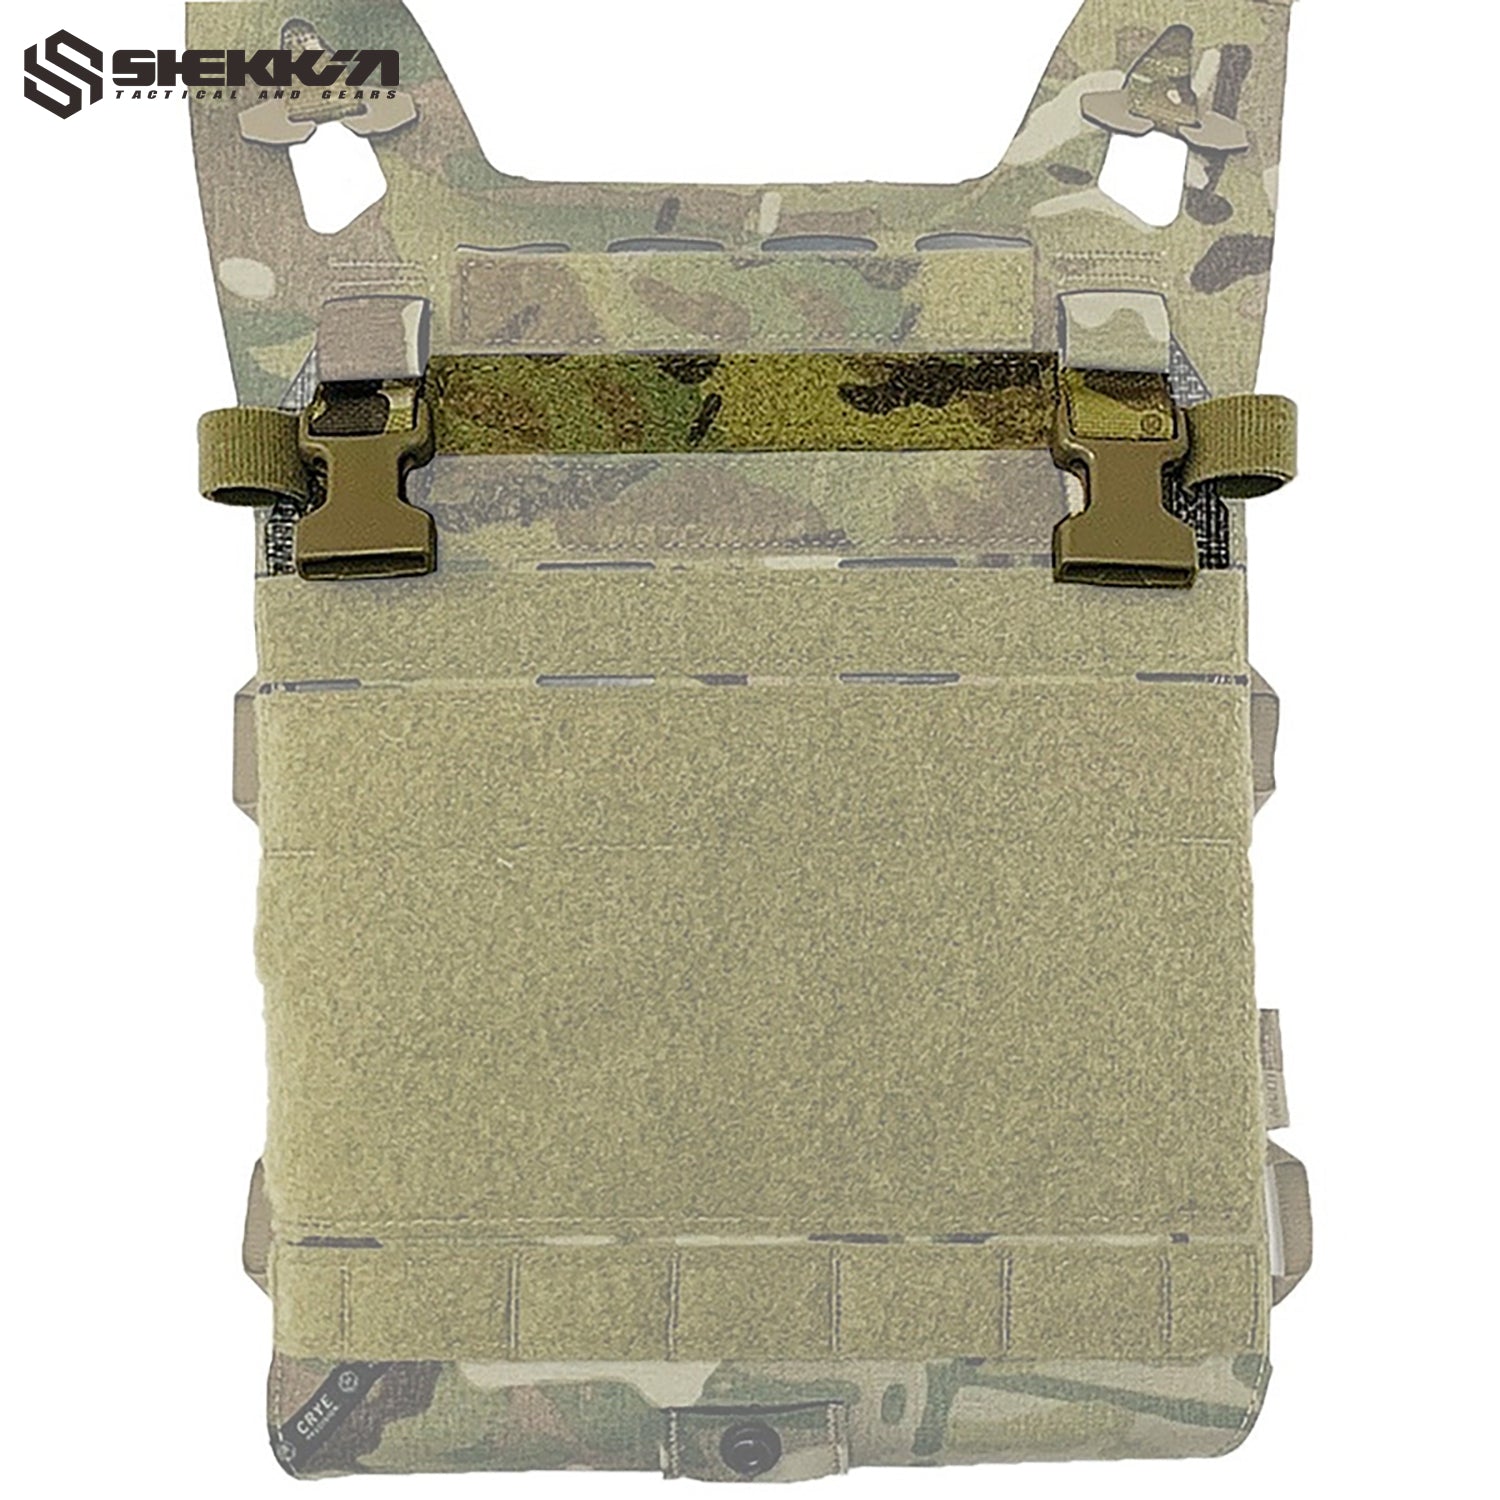 Tegris molle adapt panel for SPC - Shekkin Gears